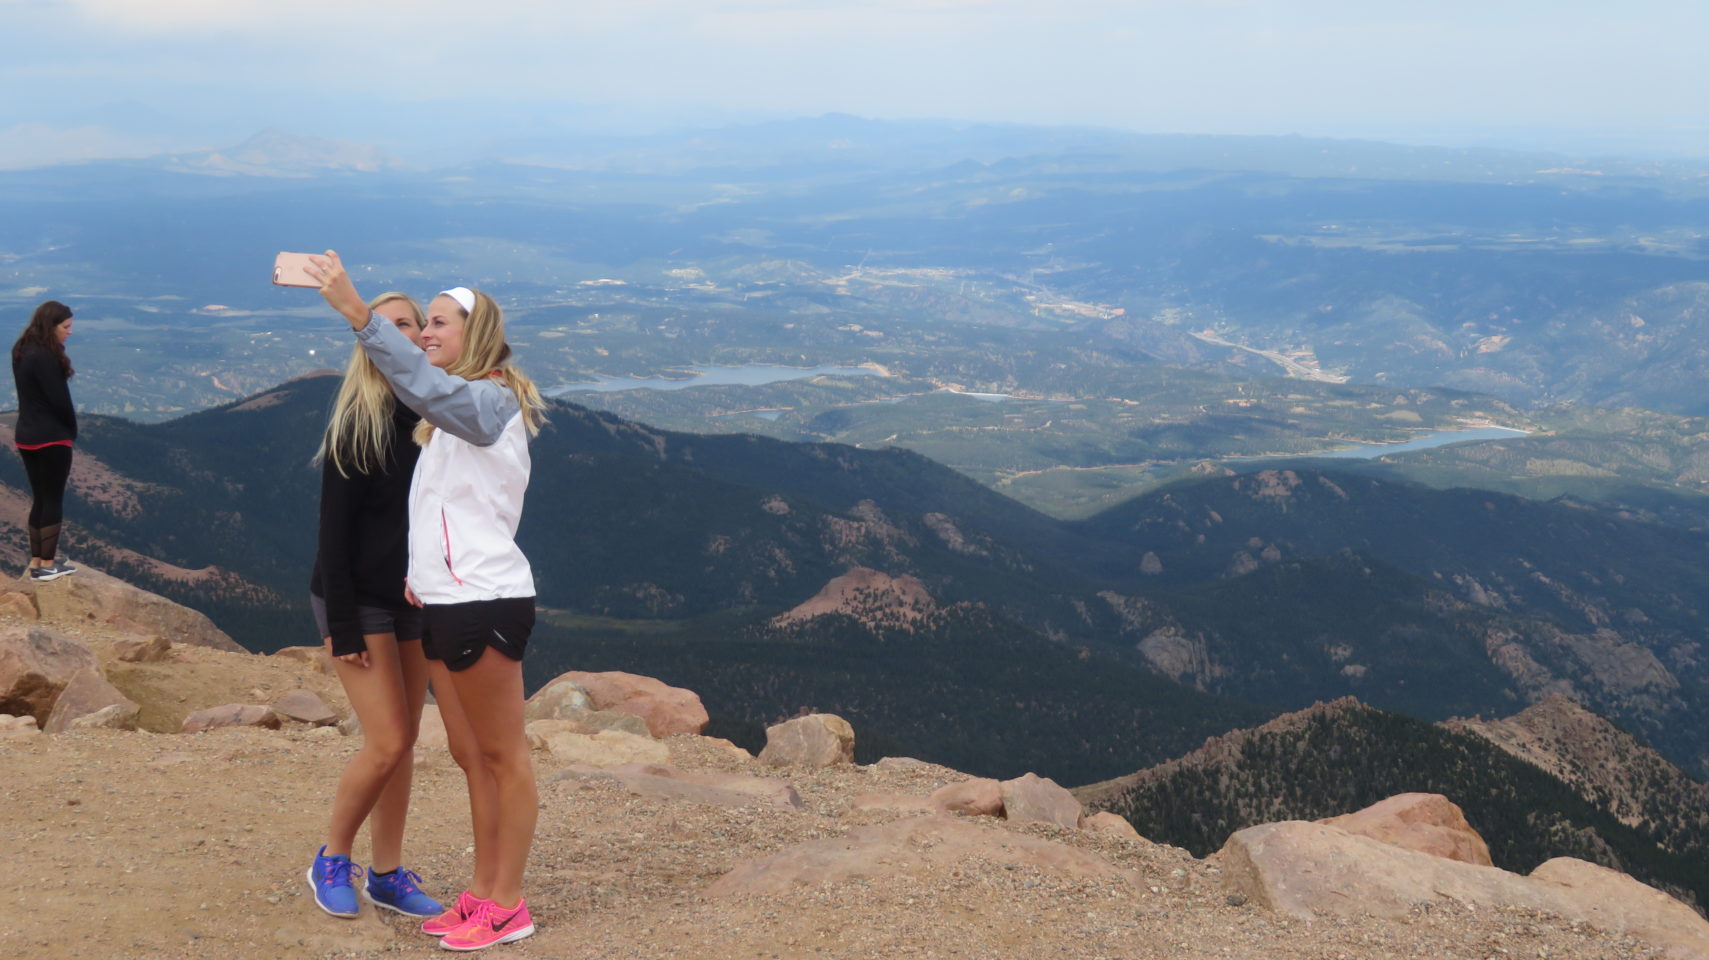 Time for a selfie from the top of Pikes Peak mountain !